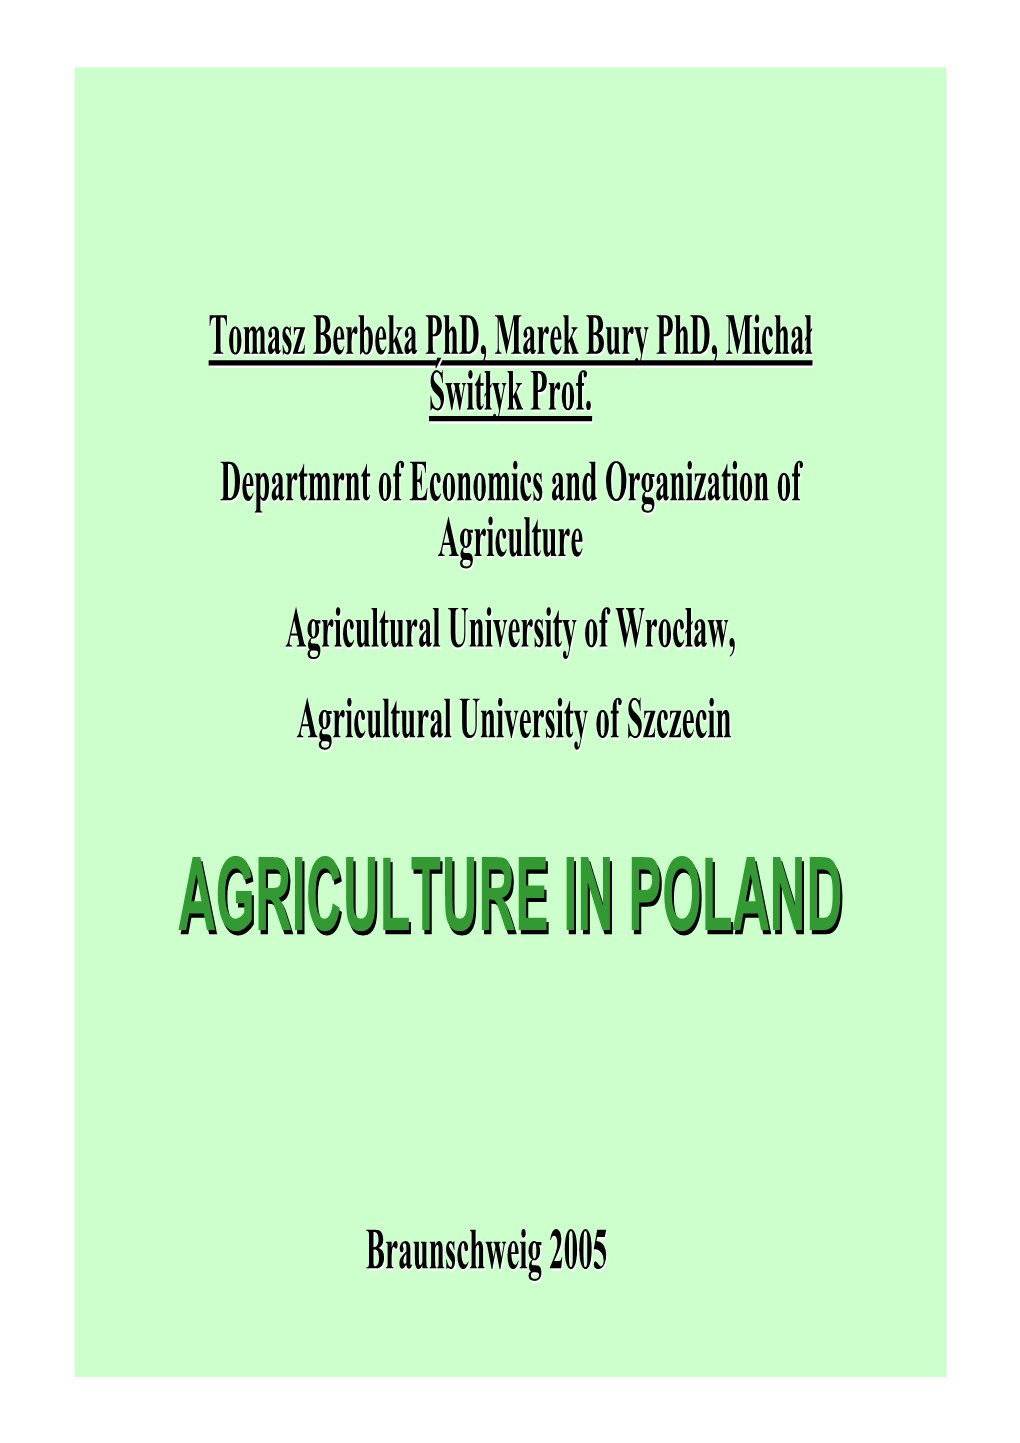 Agriculture in Poland